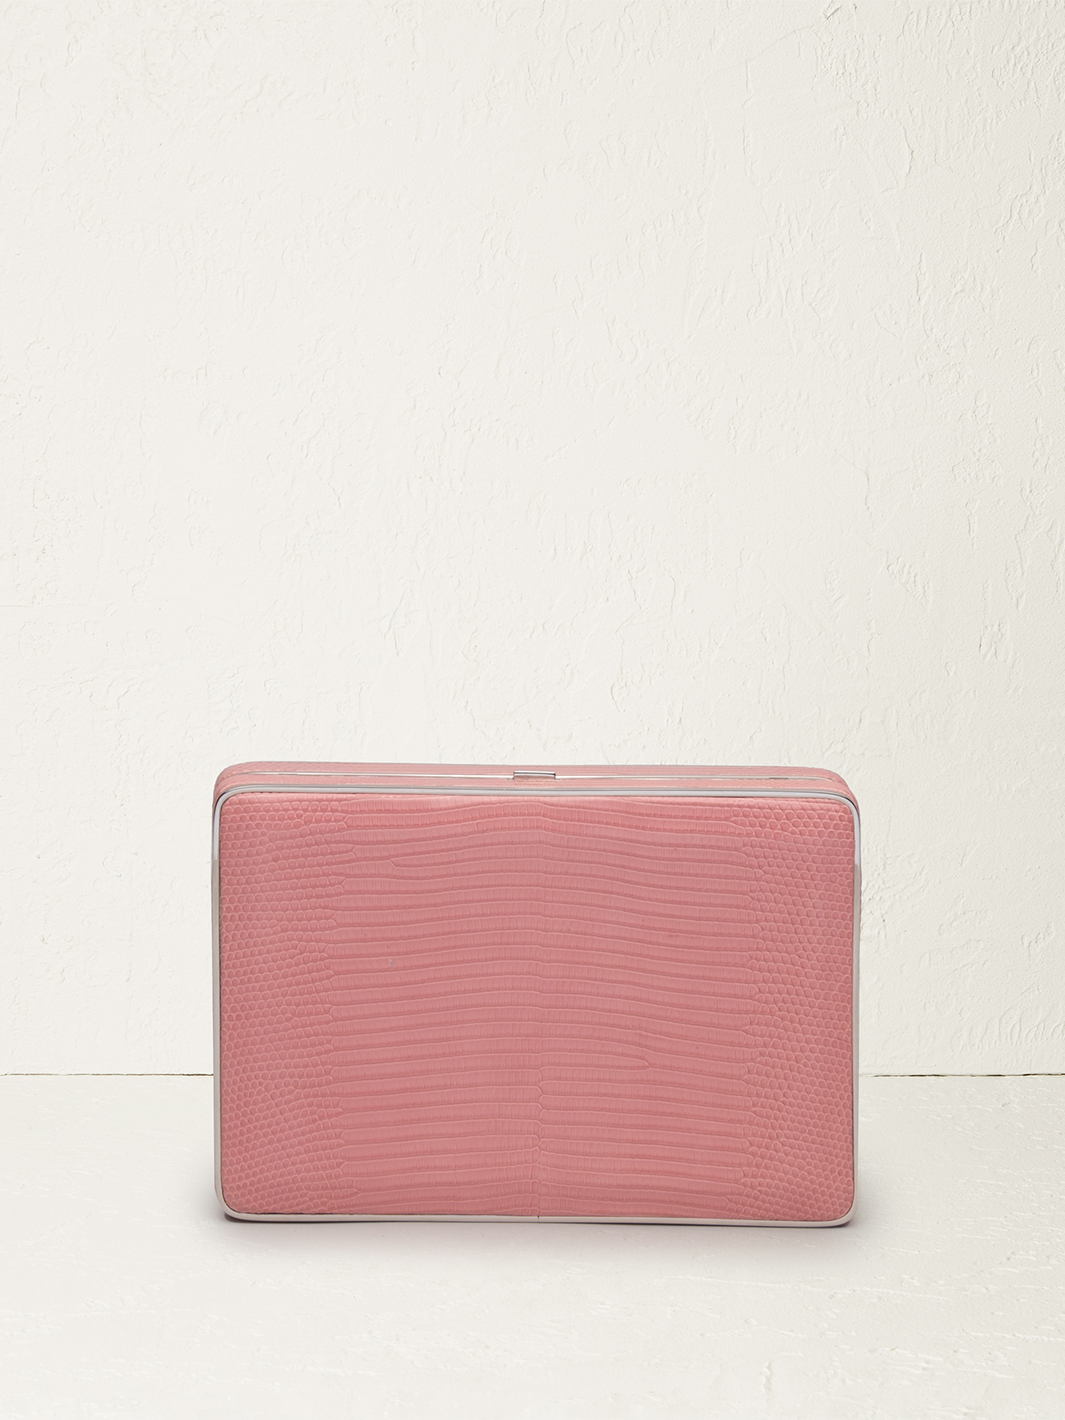 The Square Compact Case in Lizard